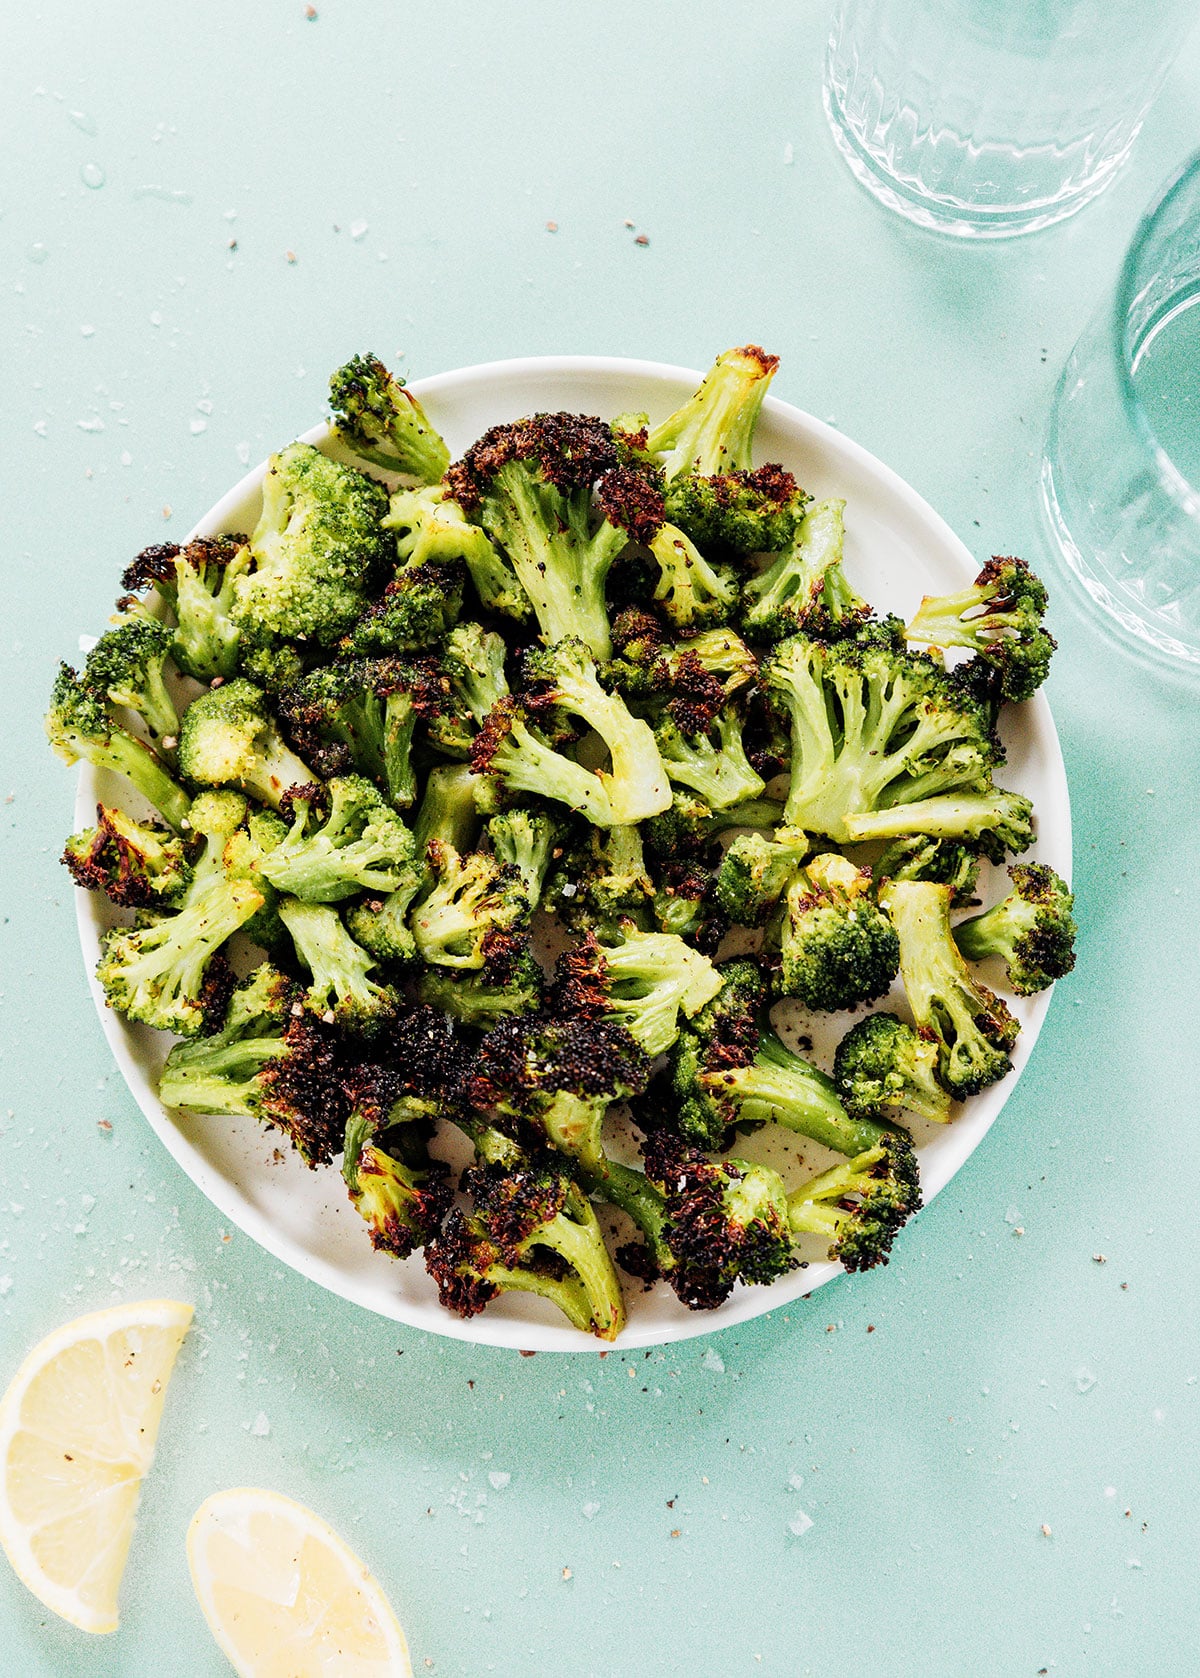 Crispy browned broccoli florets in a white serving bowl.